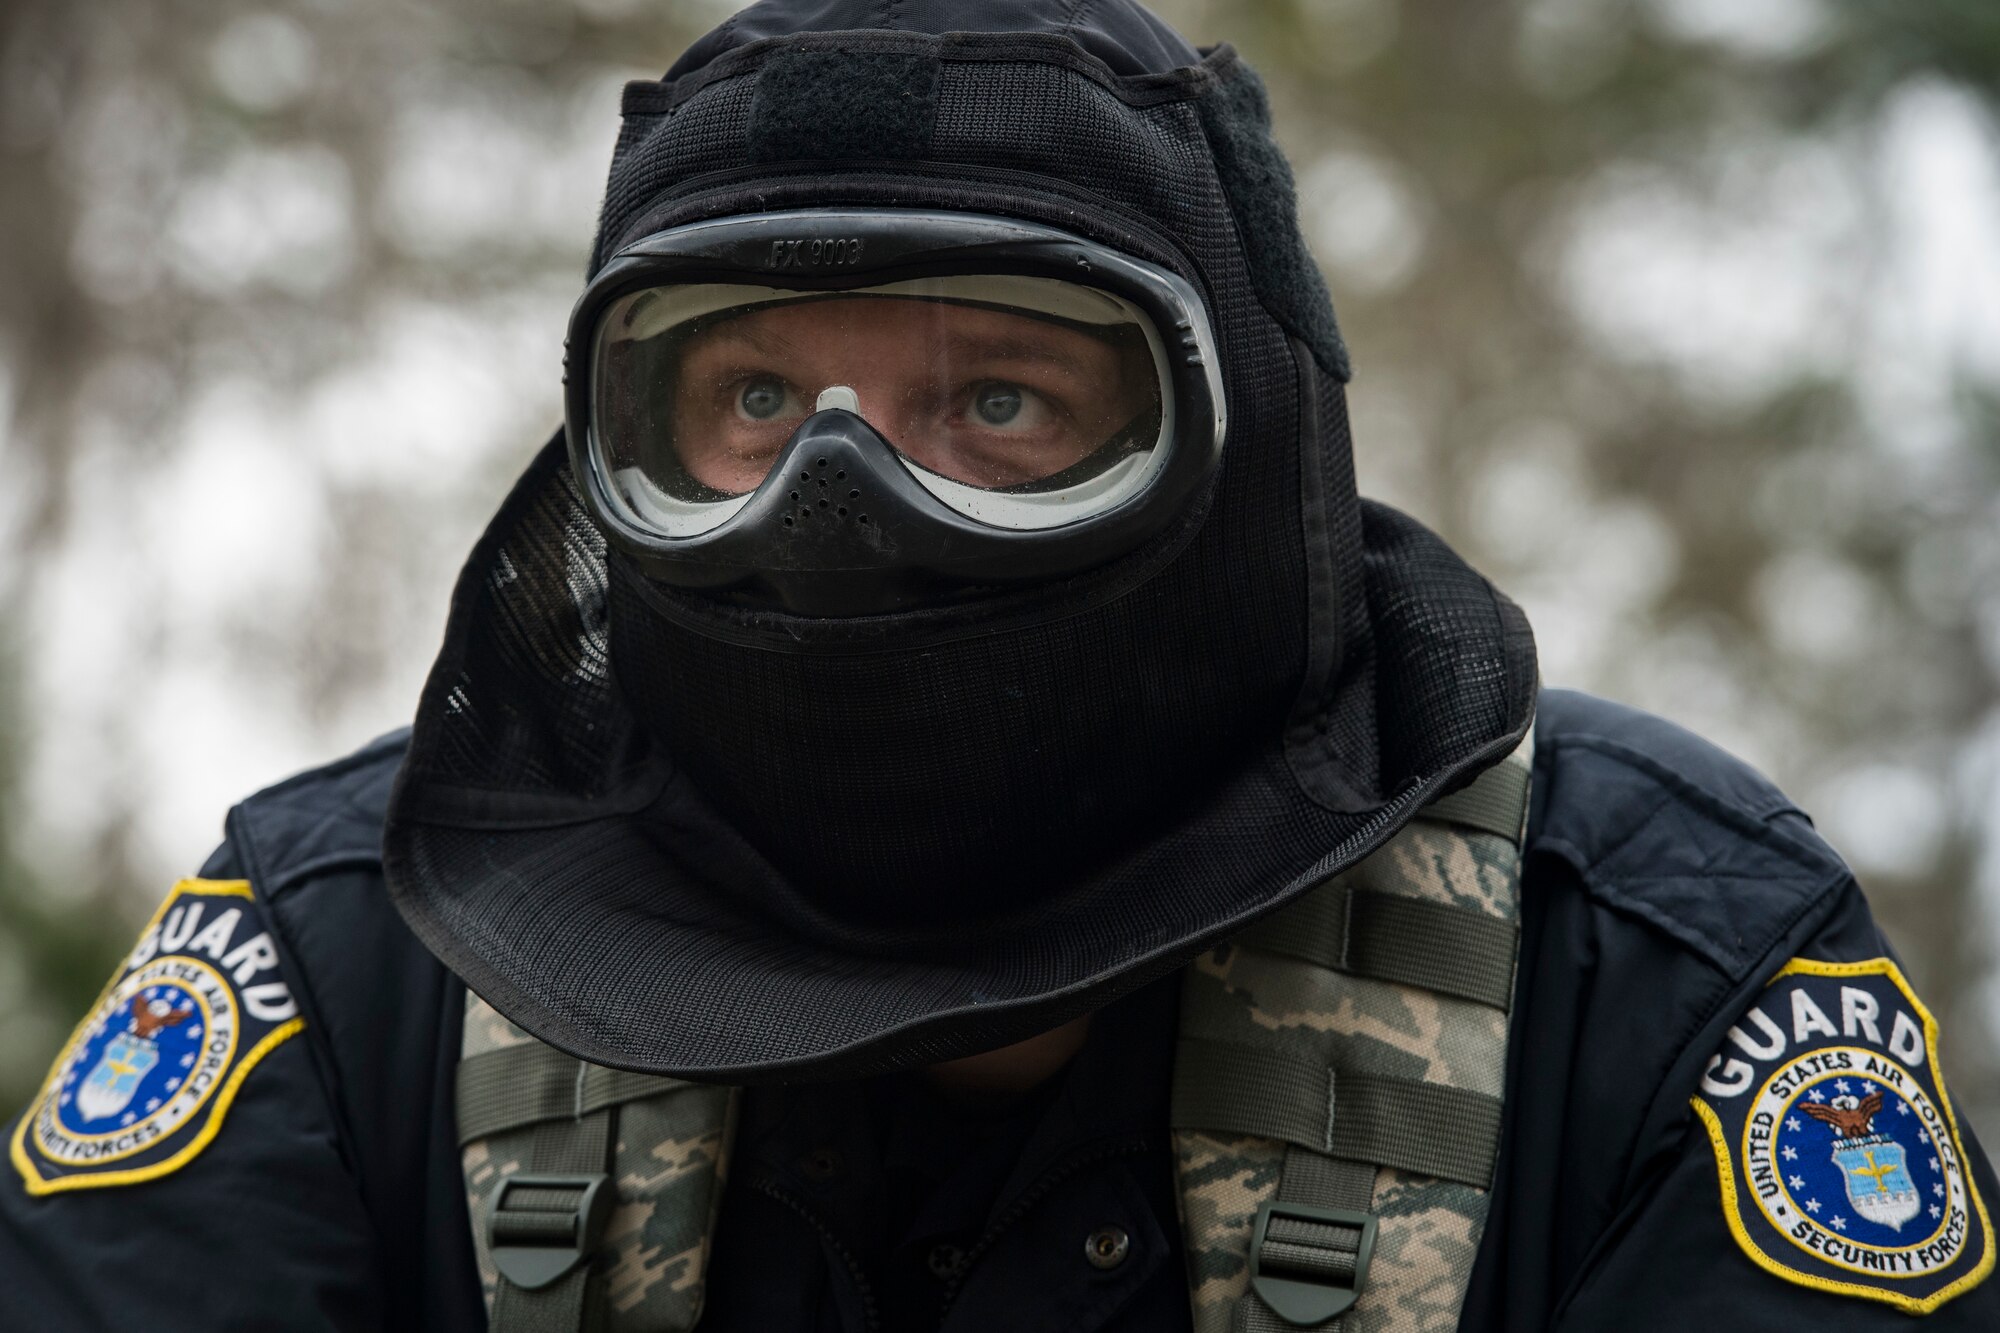 John Kramer, 23d Security Forces Squadron entry controller,
scans his perimeter during a training event, Feb. 22, 2018, at Moody Air Force Base, Ga. “Shoot, move, communicate” is a training event that tests participants on their ability to move from barricade to barricade as a team. While one member provided covering fire the others advanced on the enemy, then retreated from the scenario while they maintained cover fire. Security Forces members would employ these tactics anytime they’re under enemy fire. (U.S. Air Force photo by Senior Airman Janiqua P. Robinson)